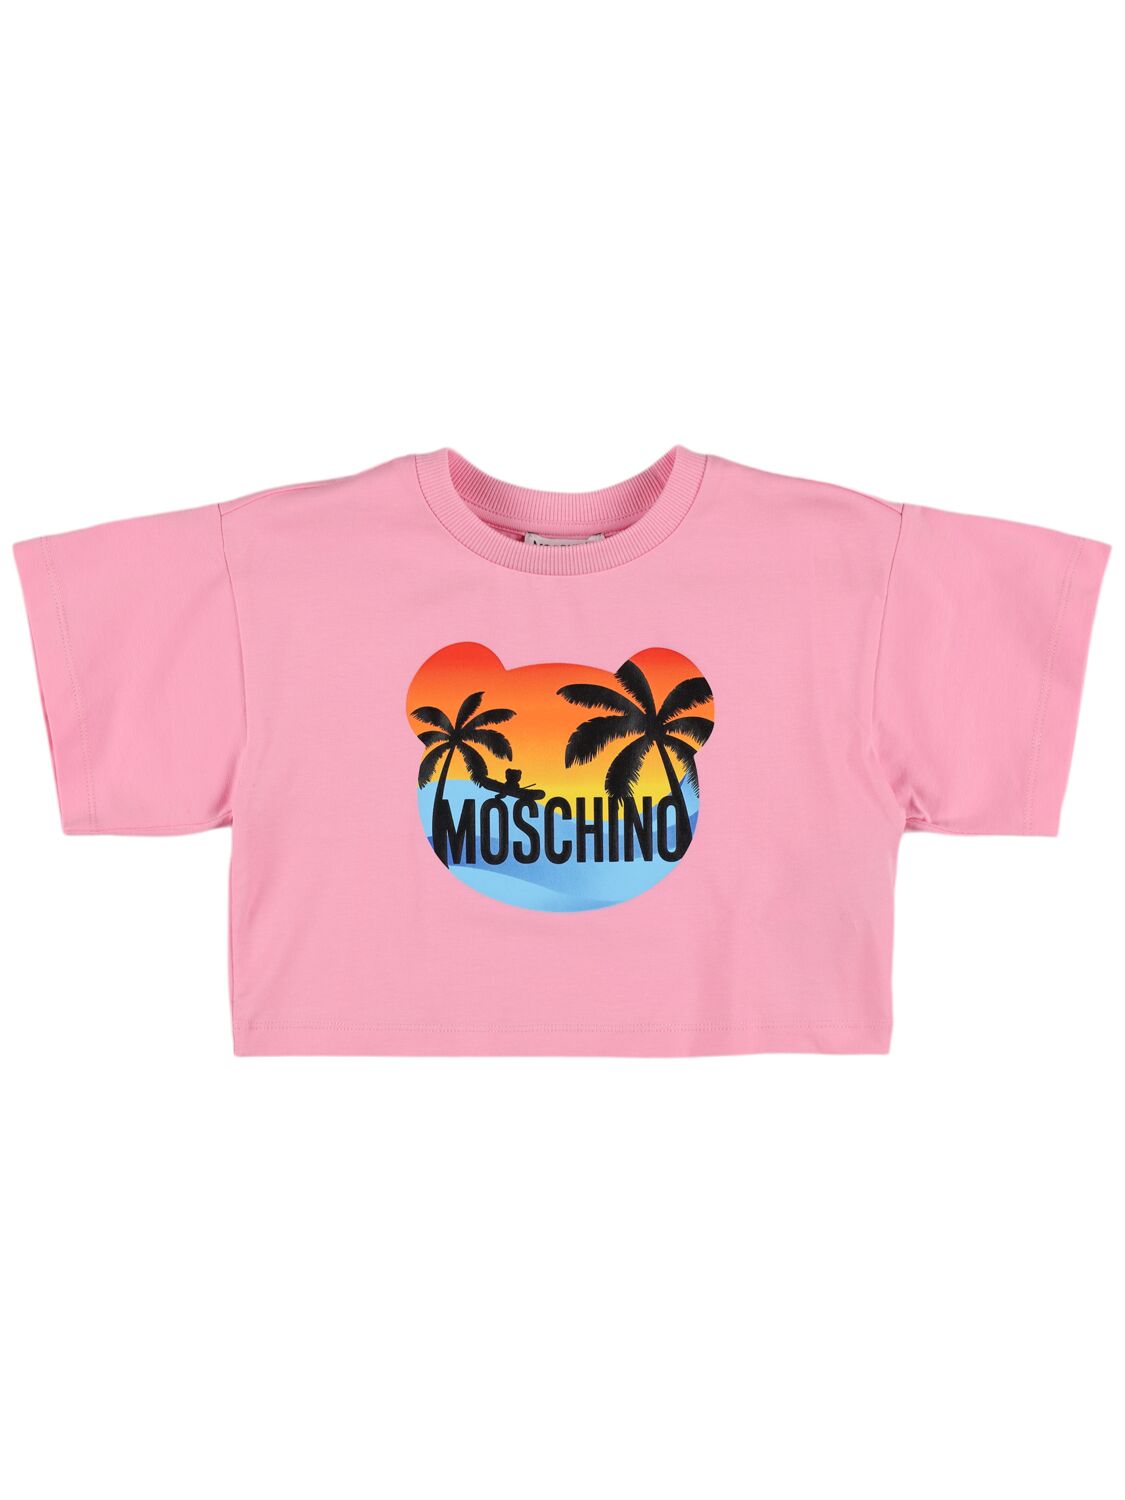 Moschino Kids' 棉质平纹针织短款t恤 In Sweet Pink